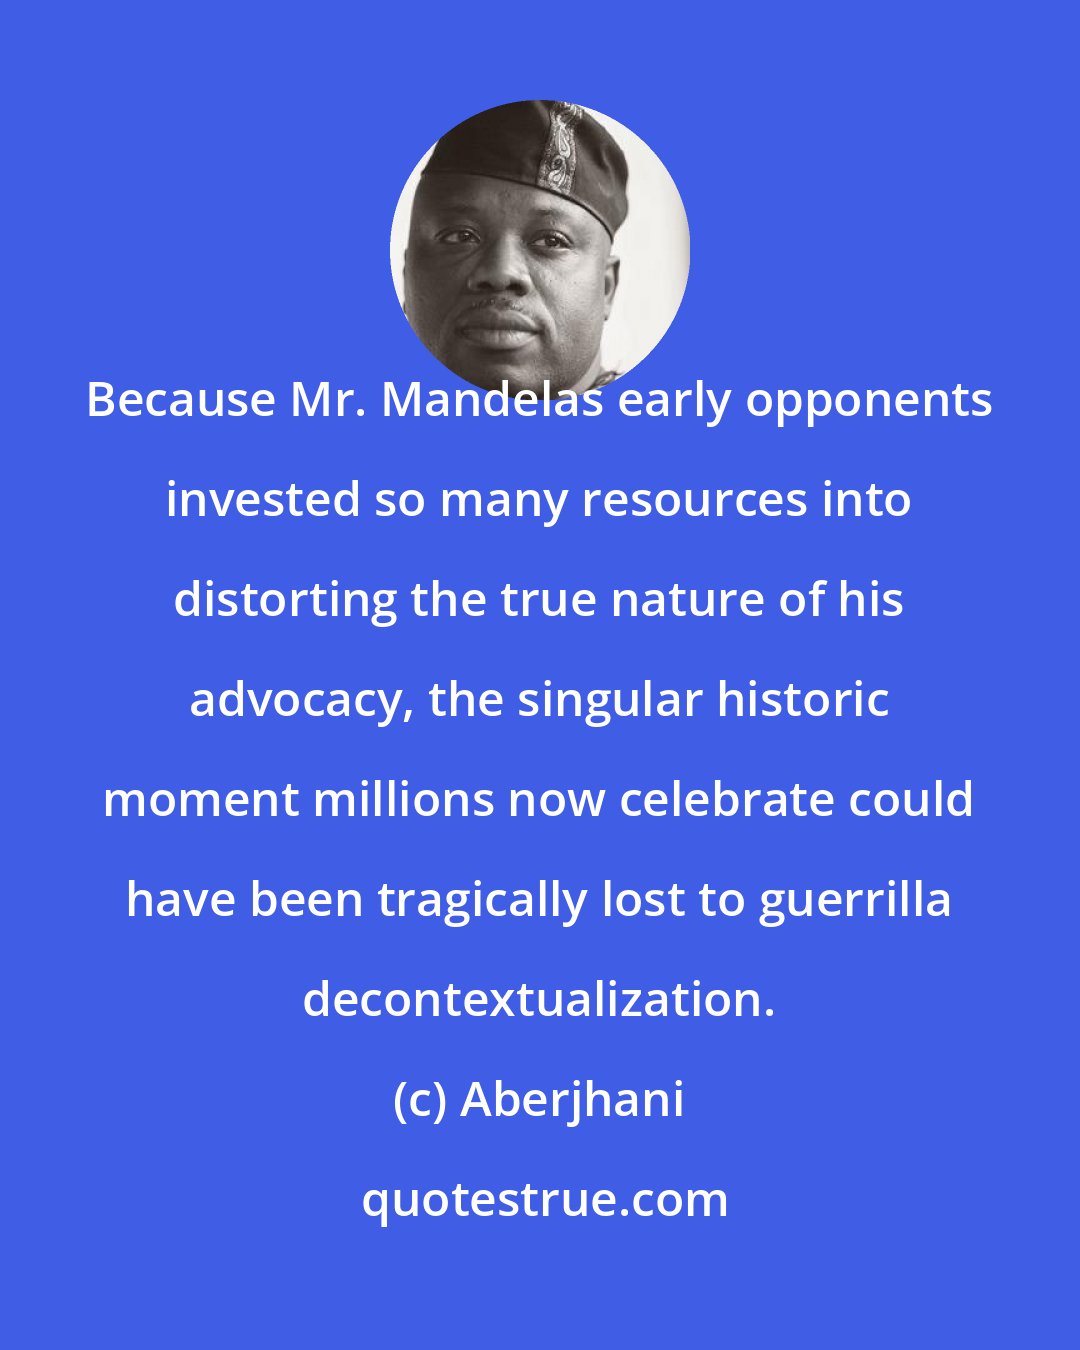 Aberjhani: Because Mr. Mandelas early opponents invested so many resources into distorting the true nature of his advocacy, the singular historic moment millions now celebrate could have been tragically lost to guerrilla decontextualization.